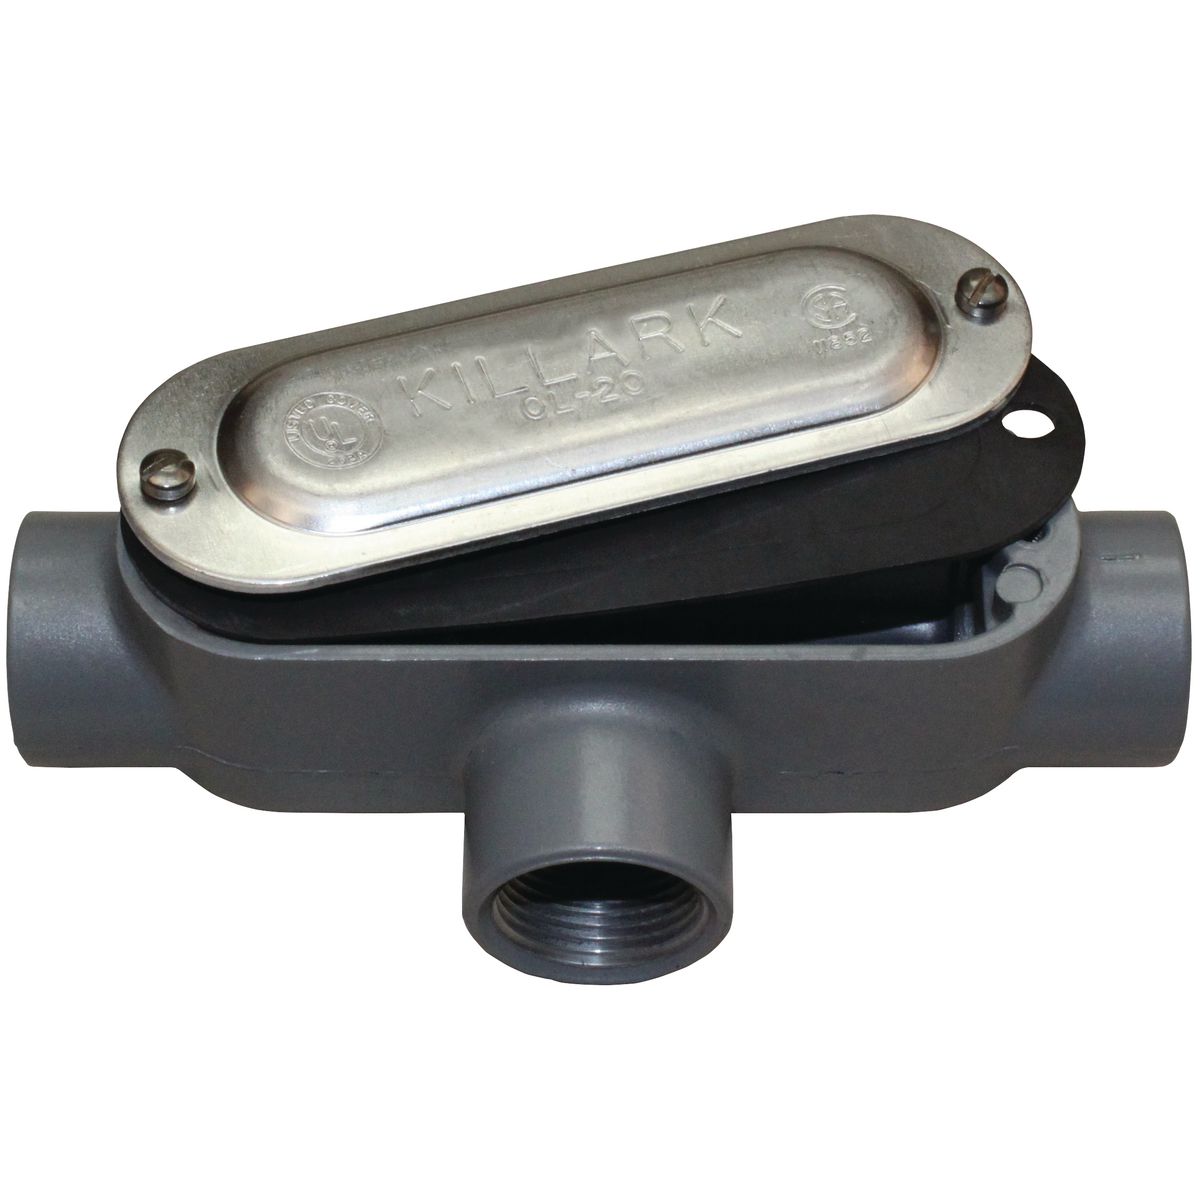 O SERIES/DURALOY 5 SERIES - ALUMINUM CONDUIT BODY WITH COVER AND GASKET- T TYPE - HUB SIZE 4 INCH - VOLUME 324.0 CUBIC INCHES